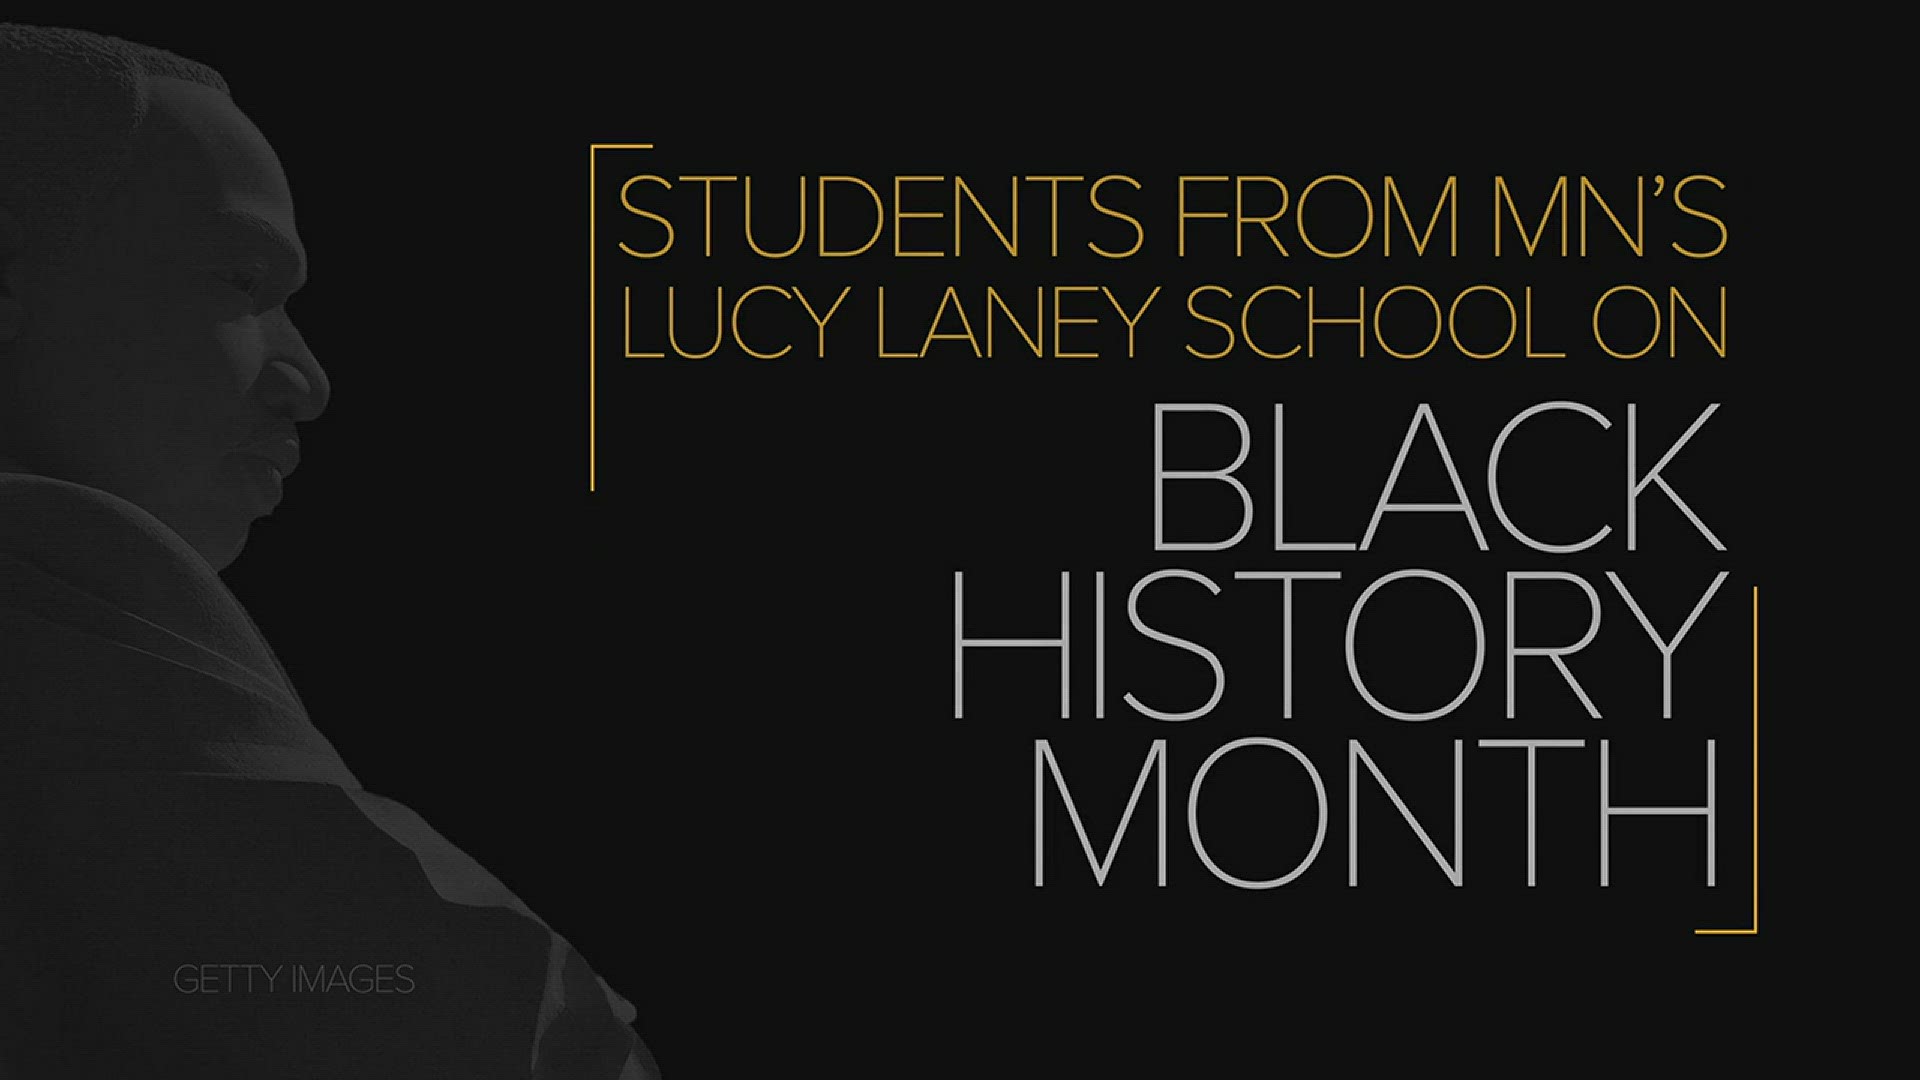 KARE 11 and Lucy Craft Laney Community school honor Black History Month with thoughts from students. "Black is awesome!"